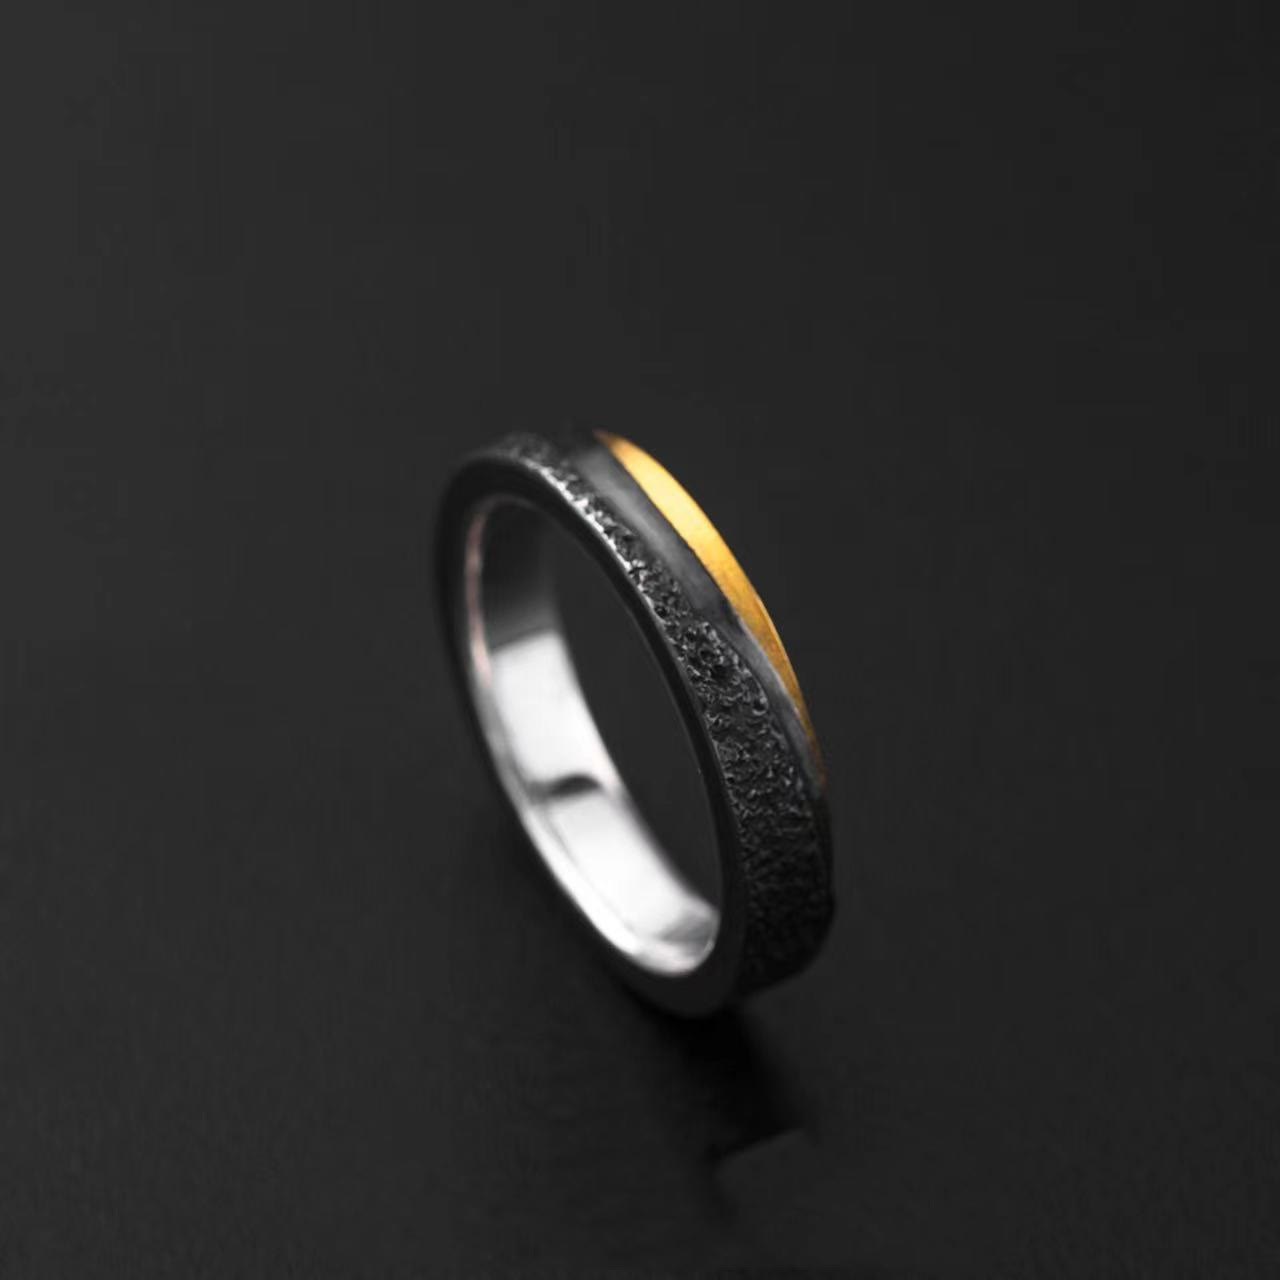 "Dawn From World" Creative Ring